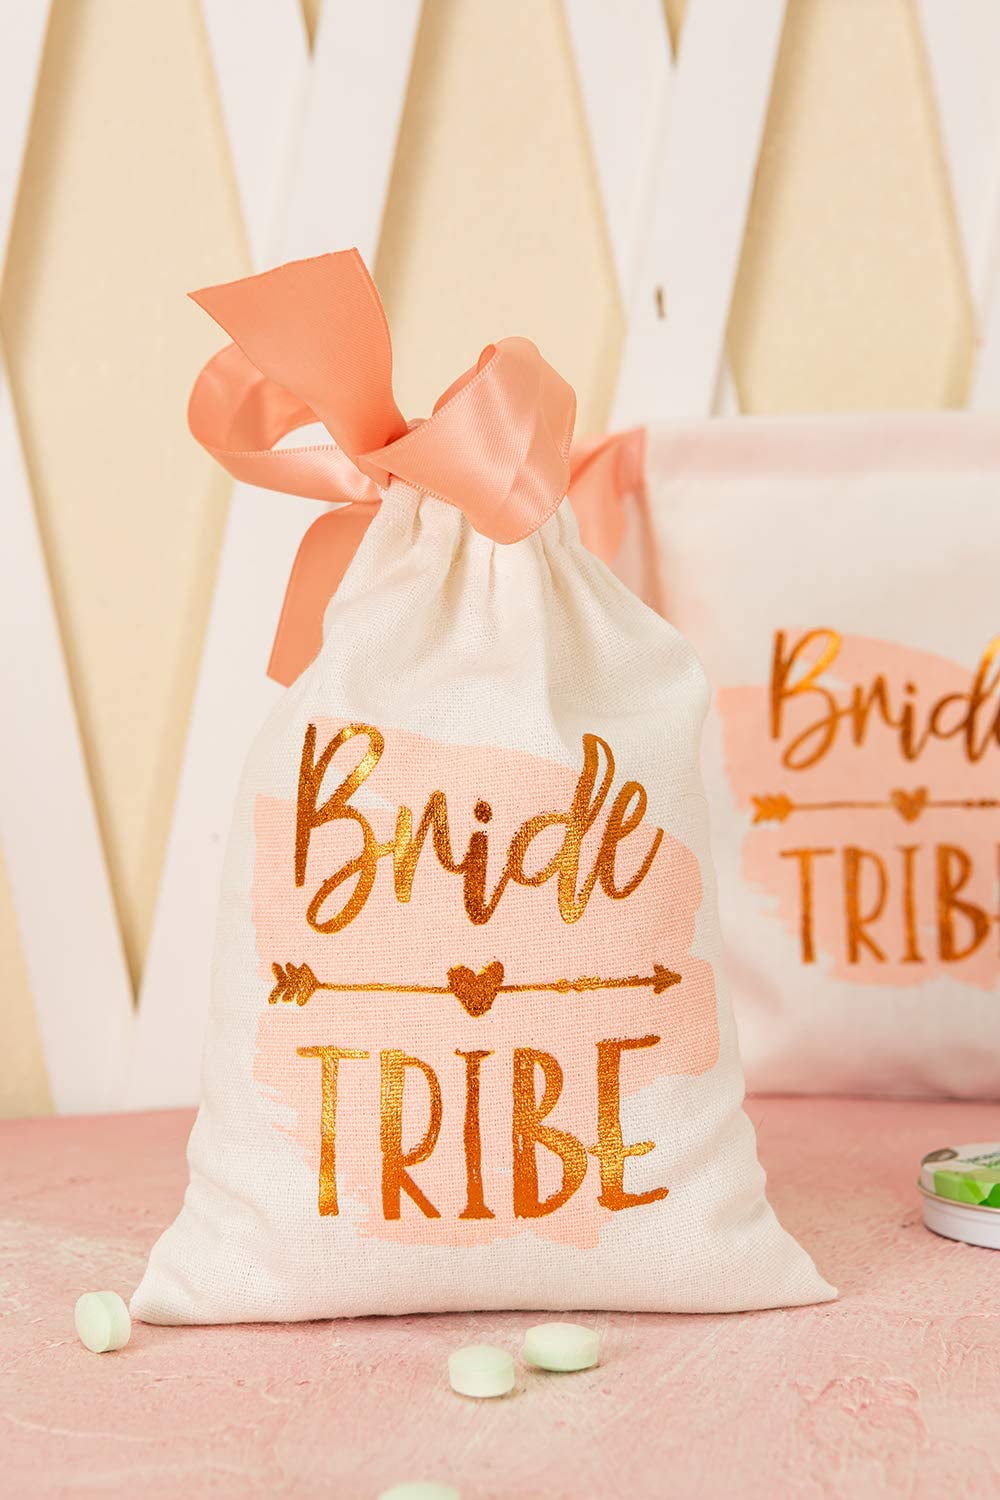 FOONEA 10pcs 5x7 Gold Foil Bride Tribe Bridesmaid Gift Bags with Pink Watercolor Cotton Muslin Drawstring Bags for Bridal Shower Bachelorette Party Hangover Kit Hangovers Bag 